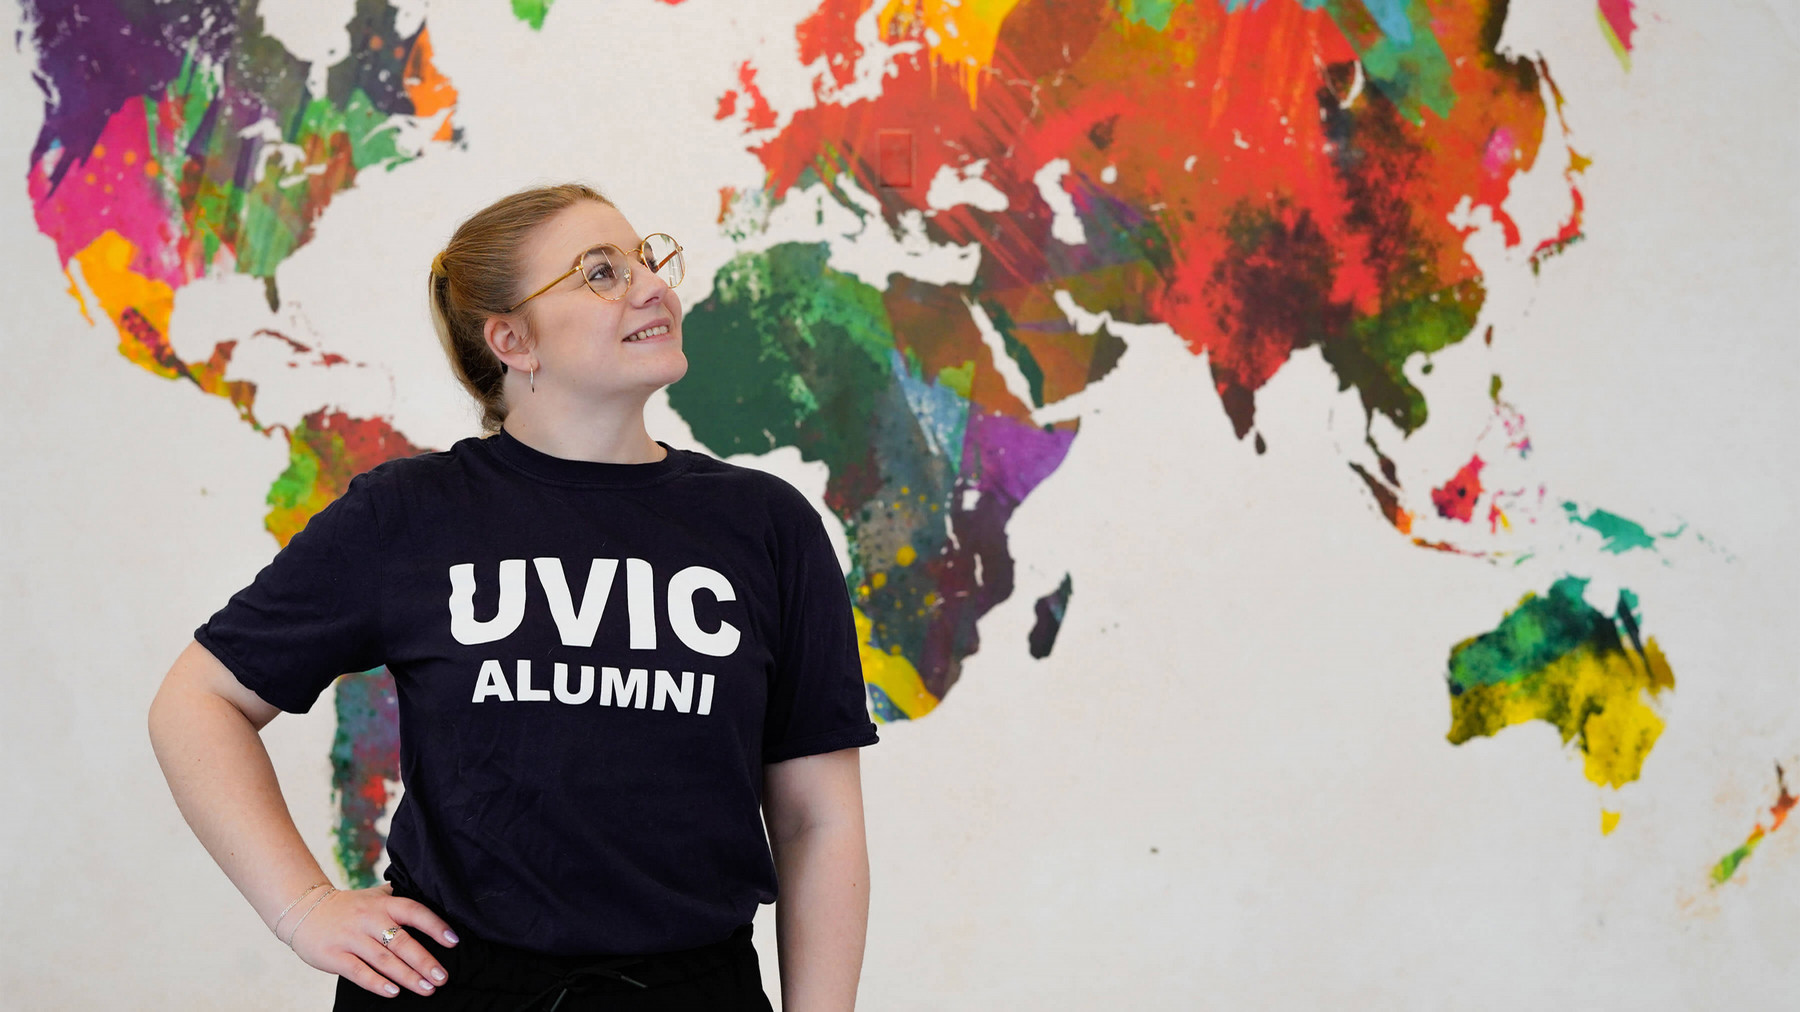 Woman wearing a T-shirt that says UVic Alumni standing in front of a map of the world.